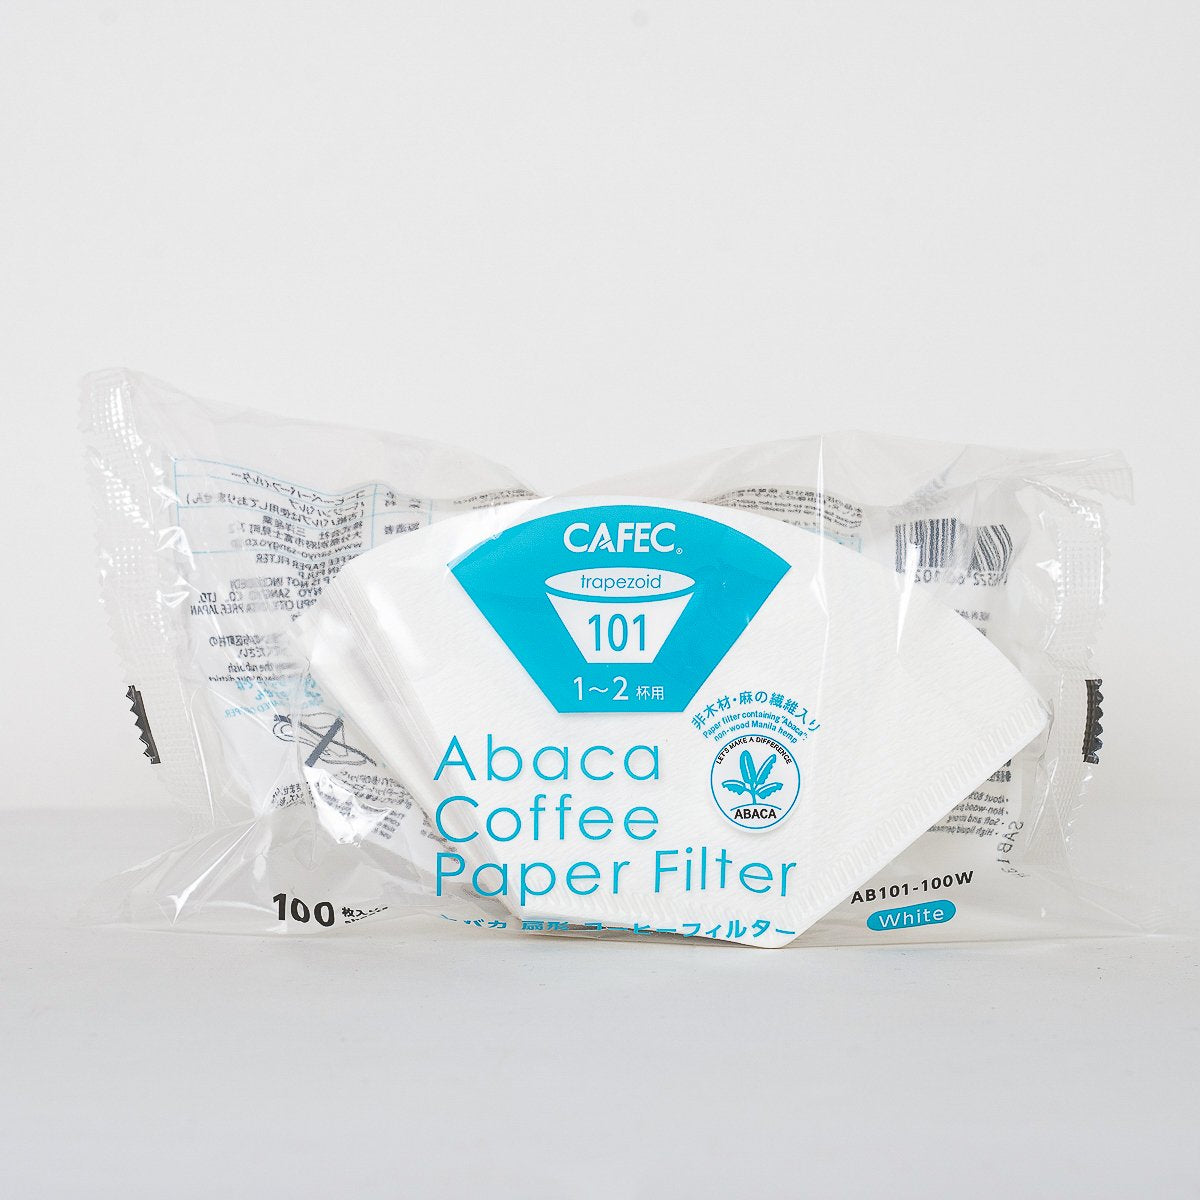 Cafec - Abaca Trapezoid Paper Filter